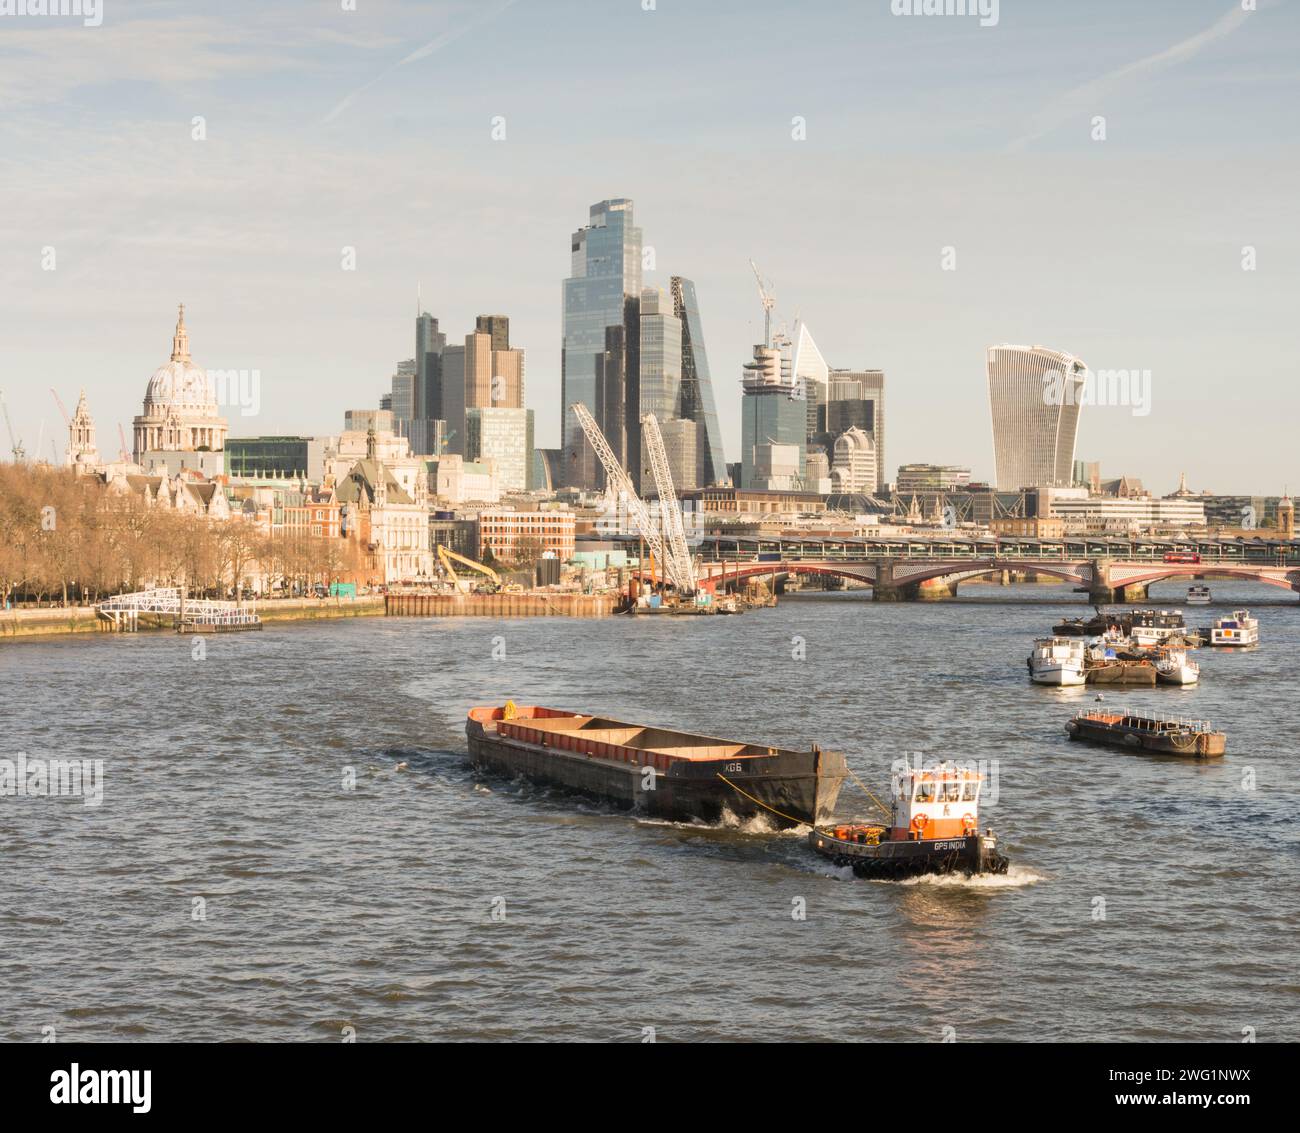 Tugboat GPS India on the River Thames, with City of London skyline skyscrapers  in the background, as seen from Waterloo Bridge, London, England, U.K. Stock Photo